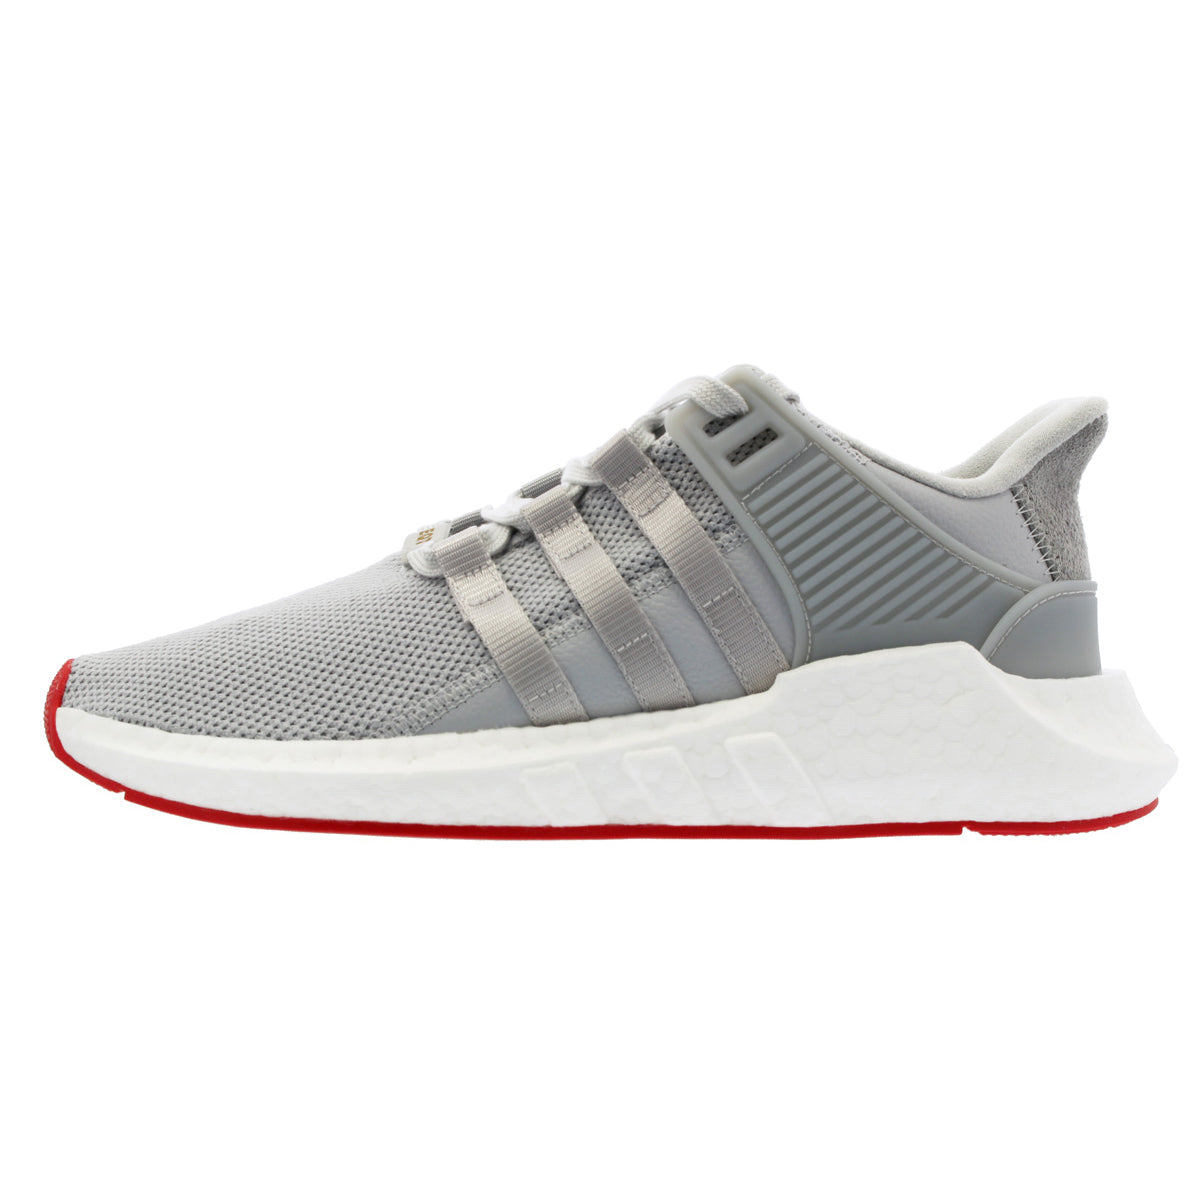 adidas EQT Support 93/17 Red Carpet Pack Grey